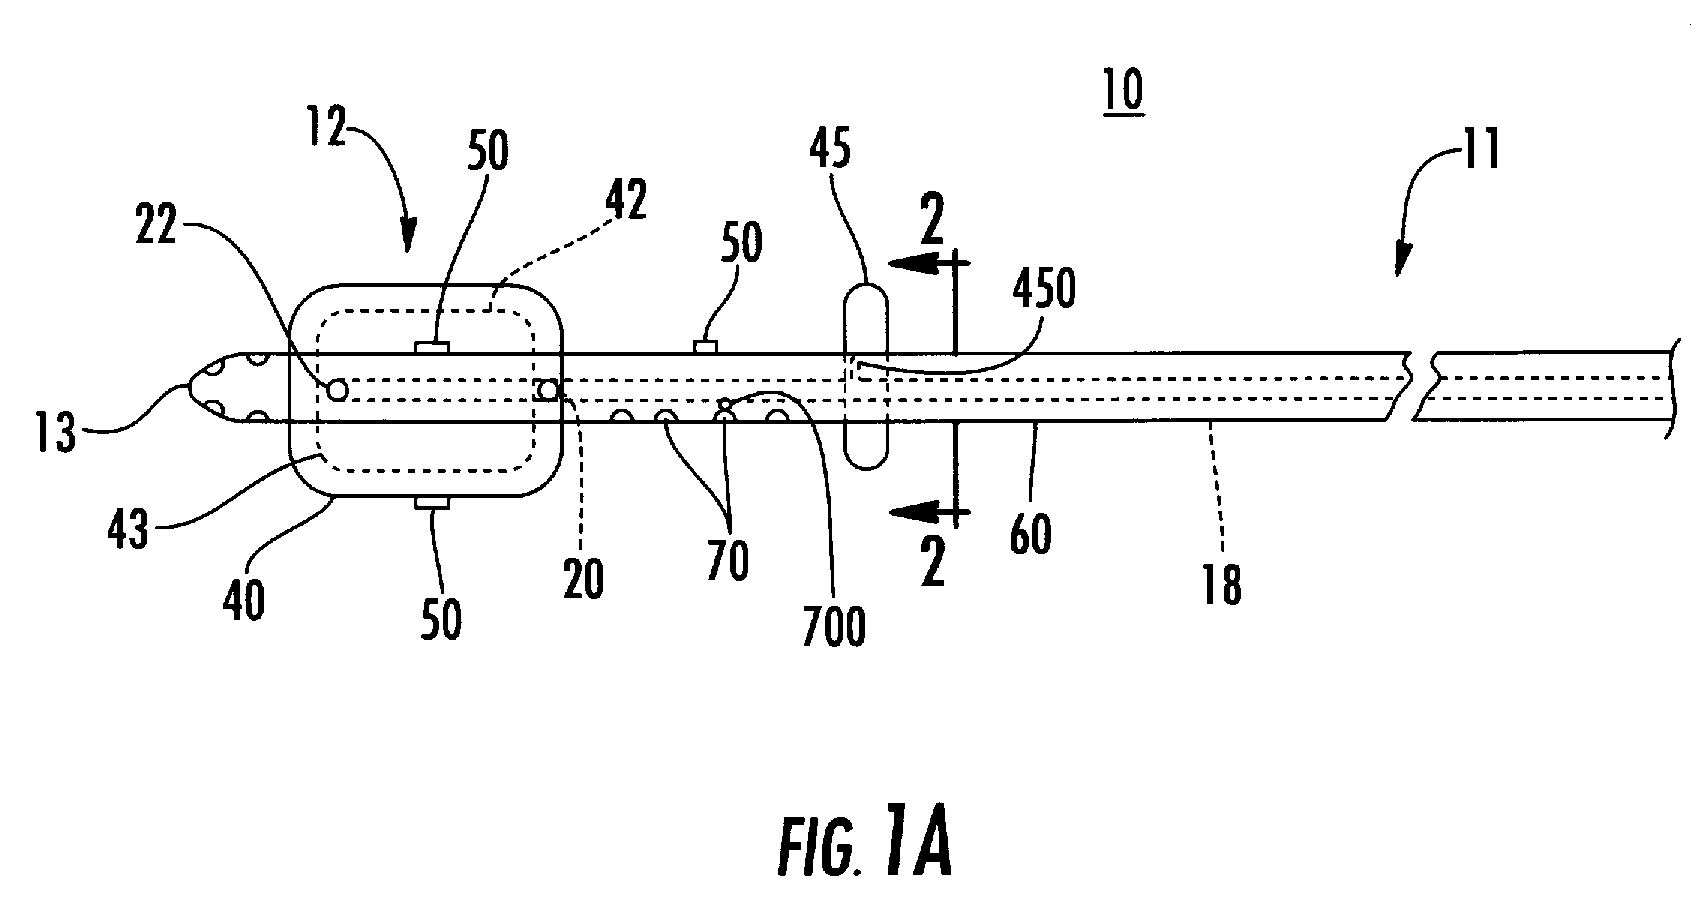 Process and device for selectively treating interstitial tissue